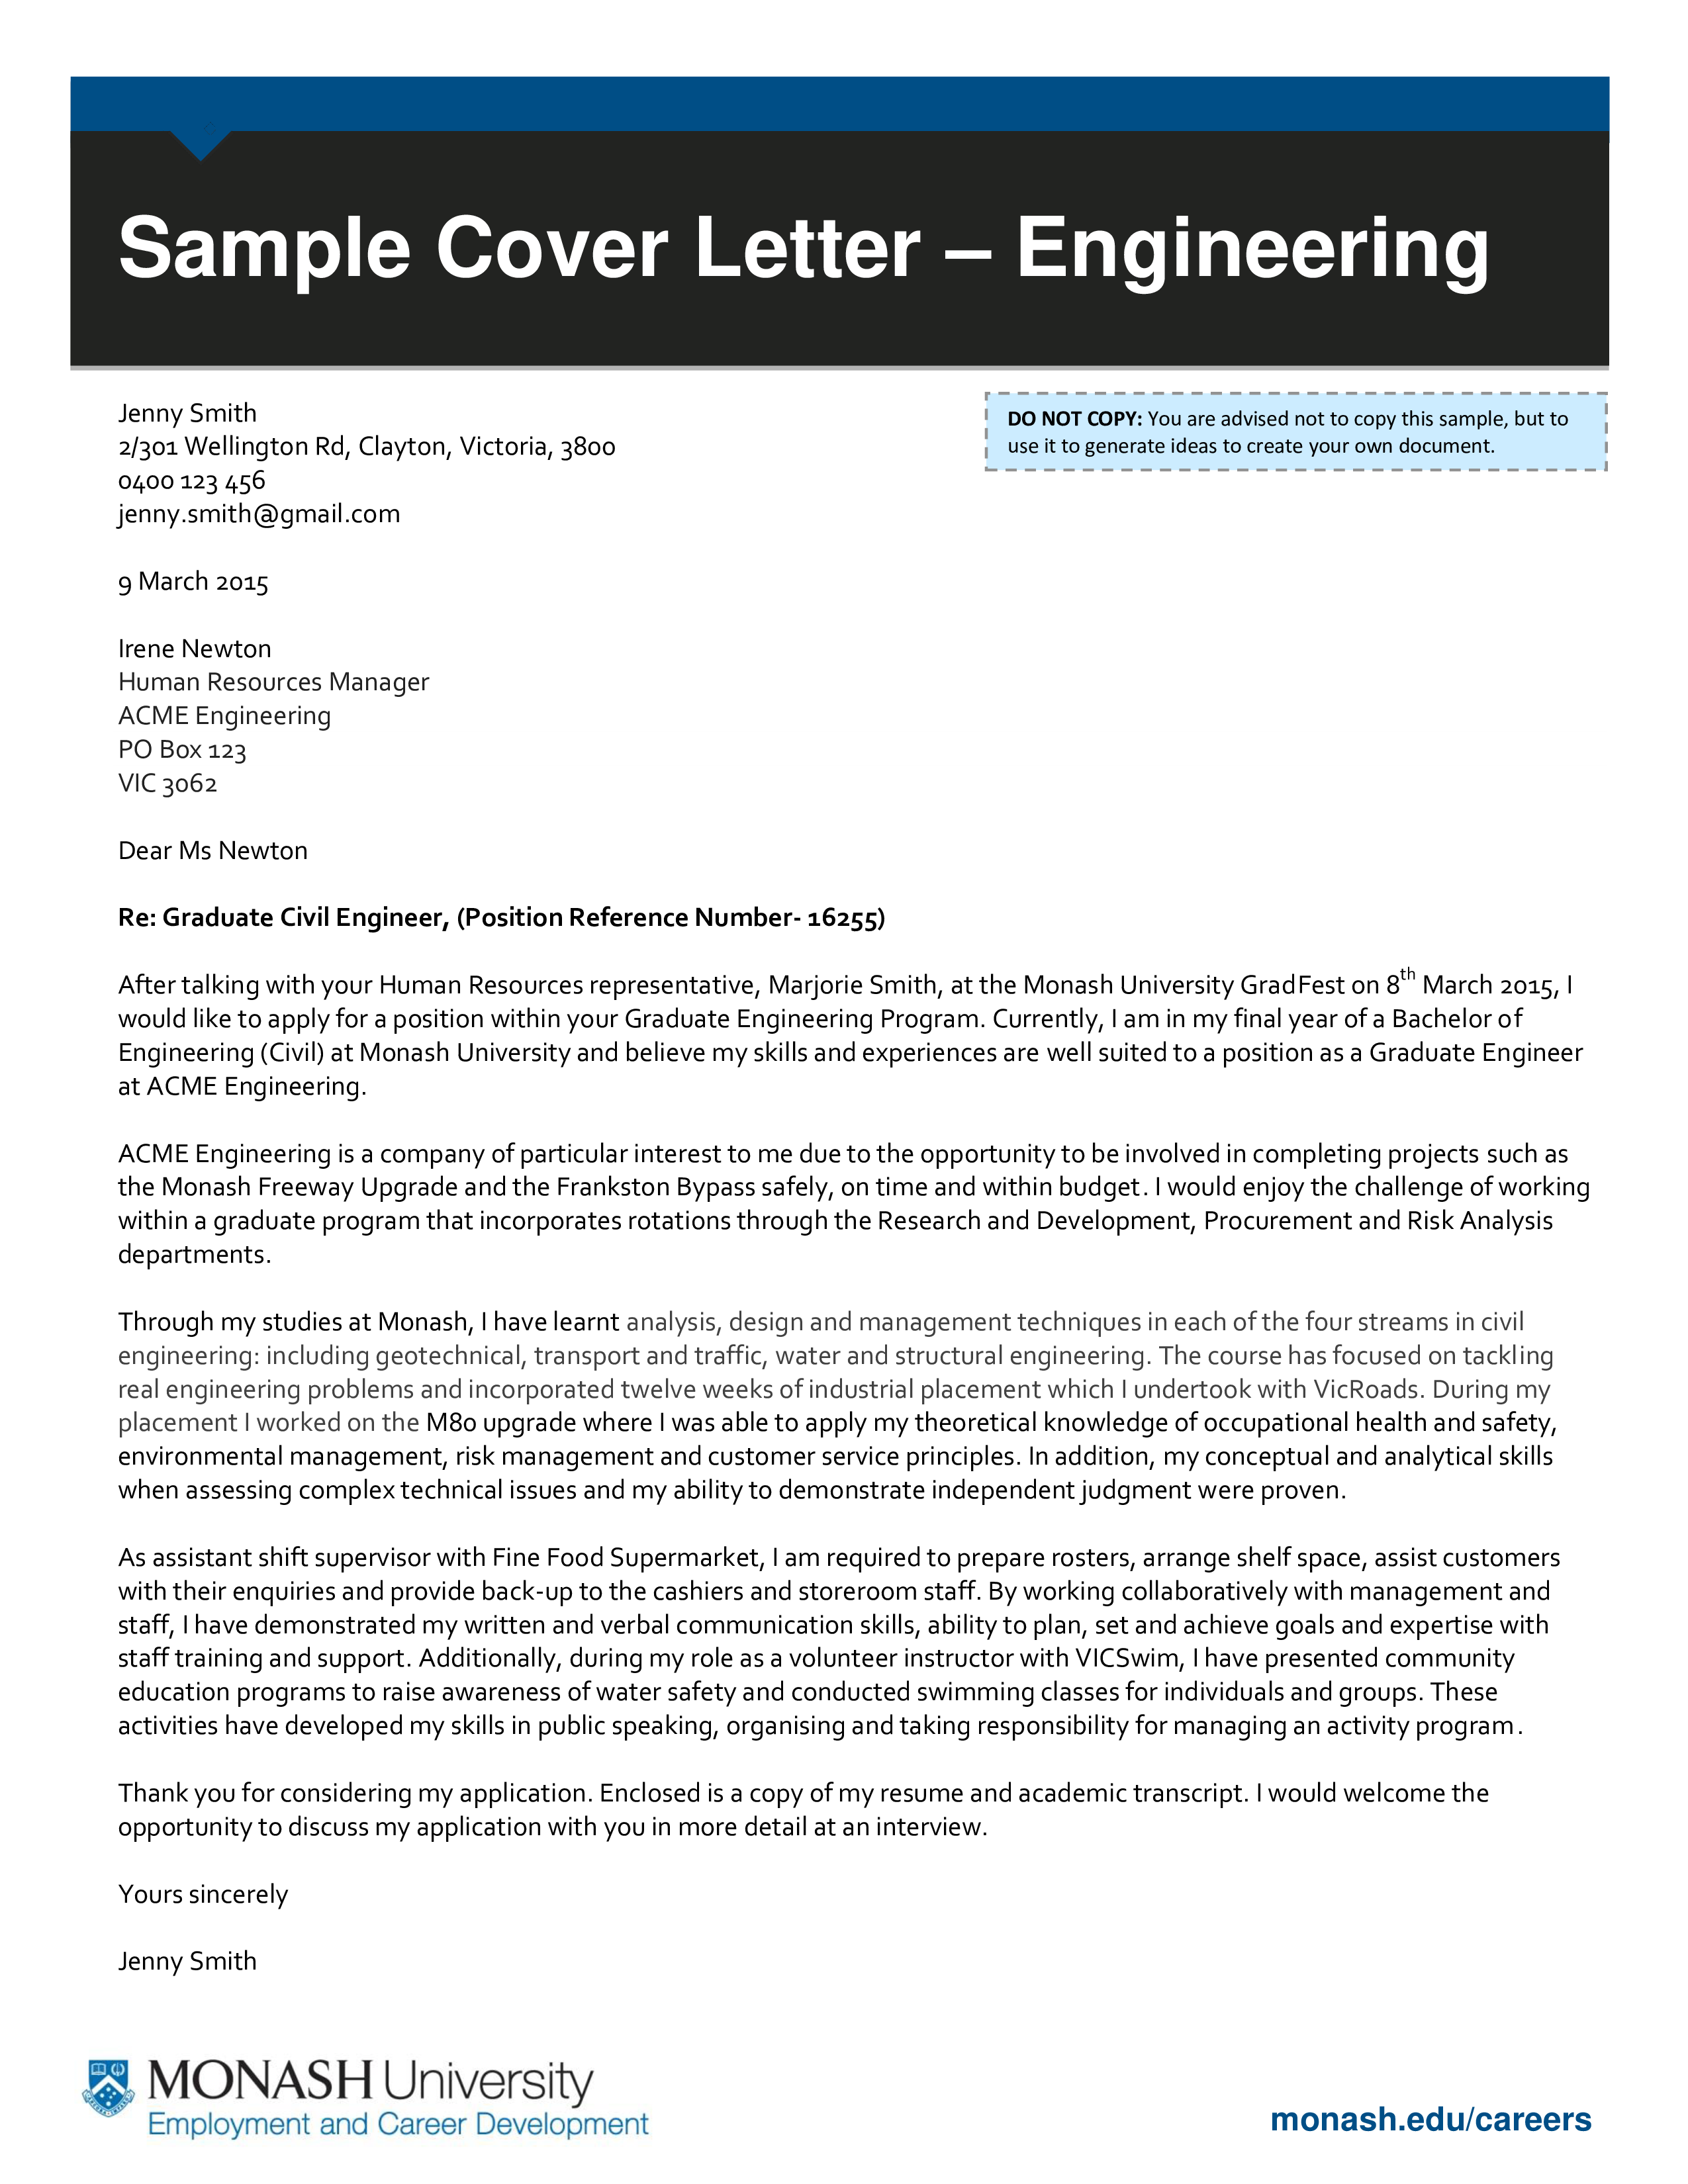 Computer engineering resume cover letter 3l